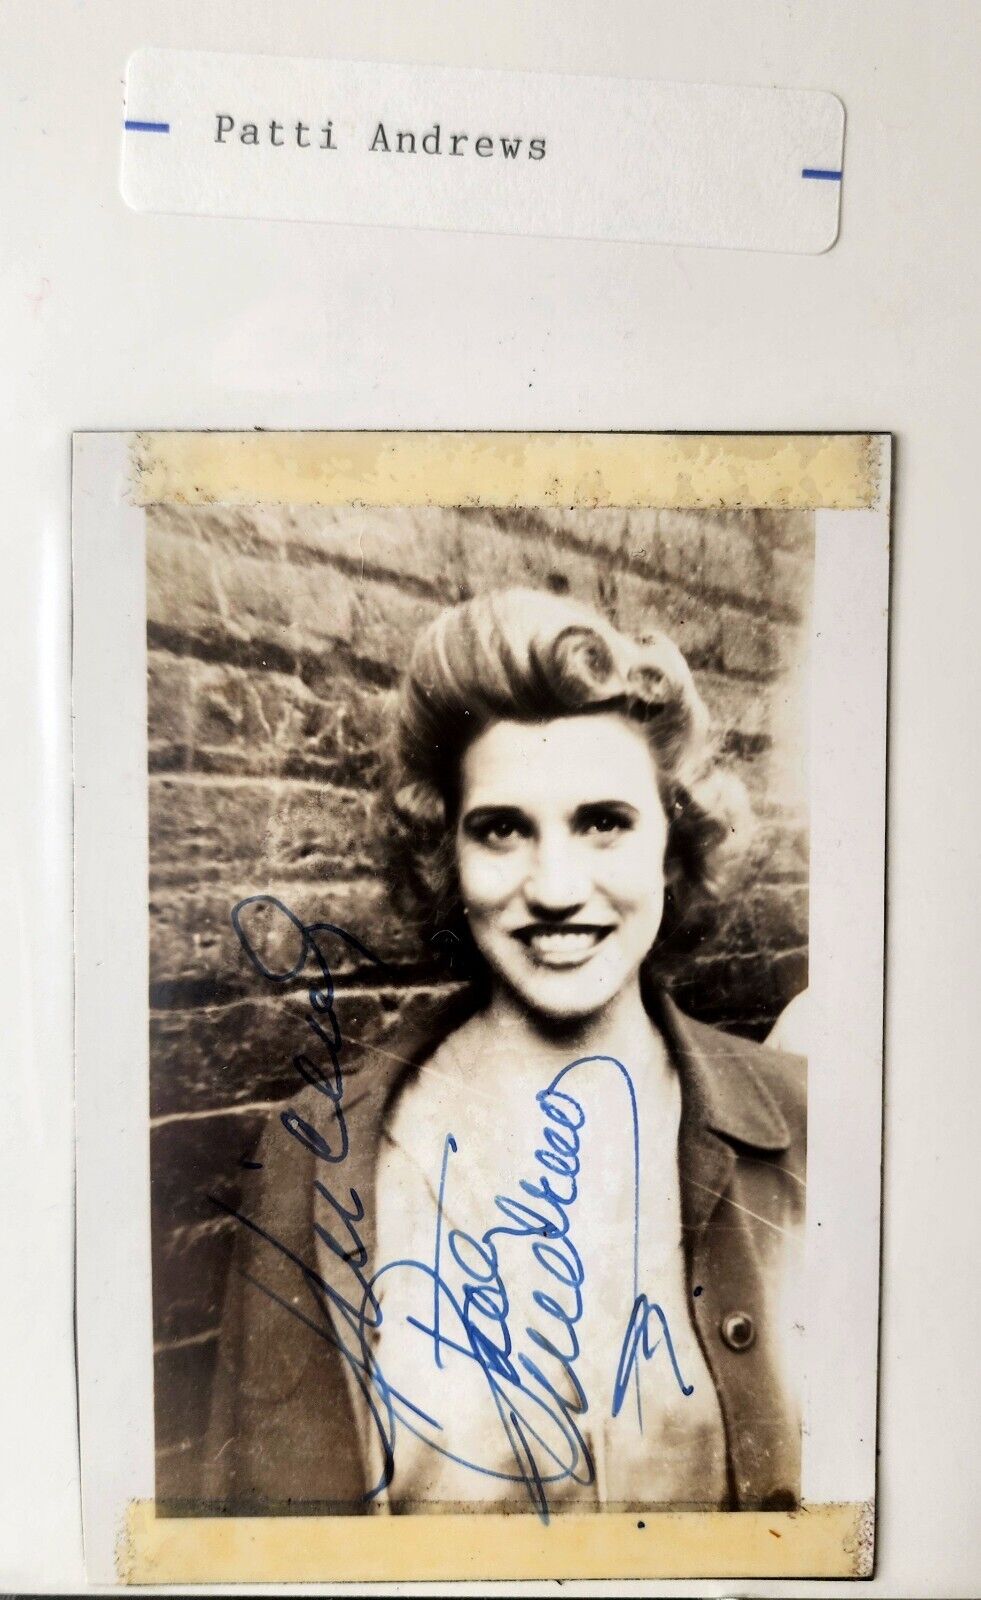 Patty Andrews Original Vintage Photo Autographed Signature The Andrews Sisters 